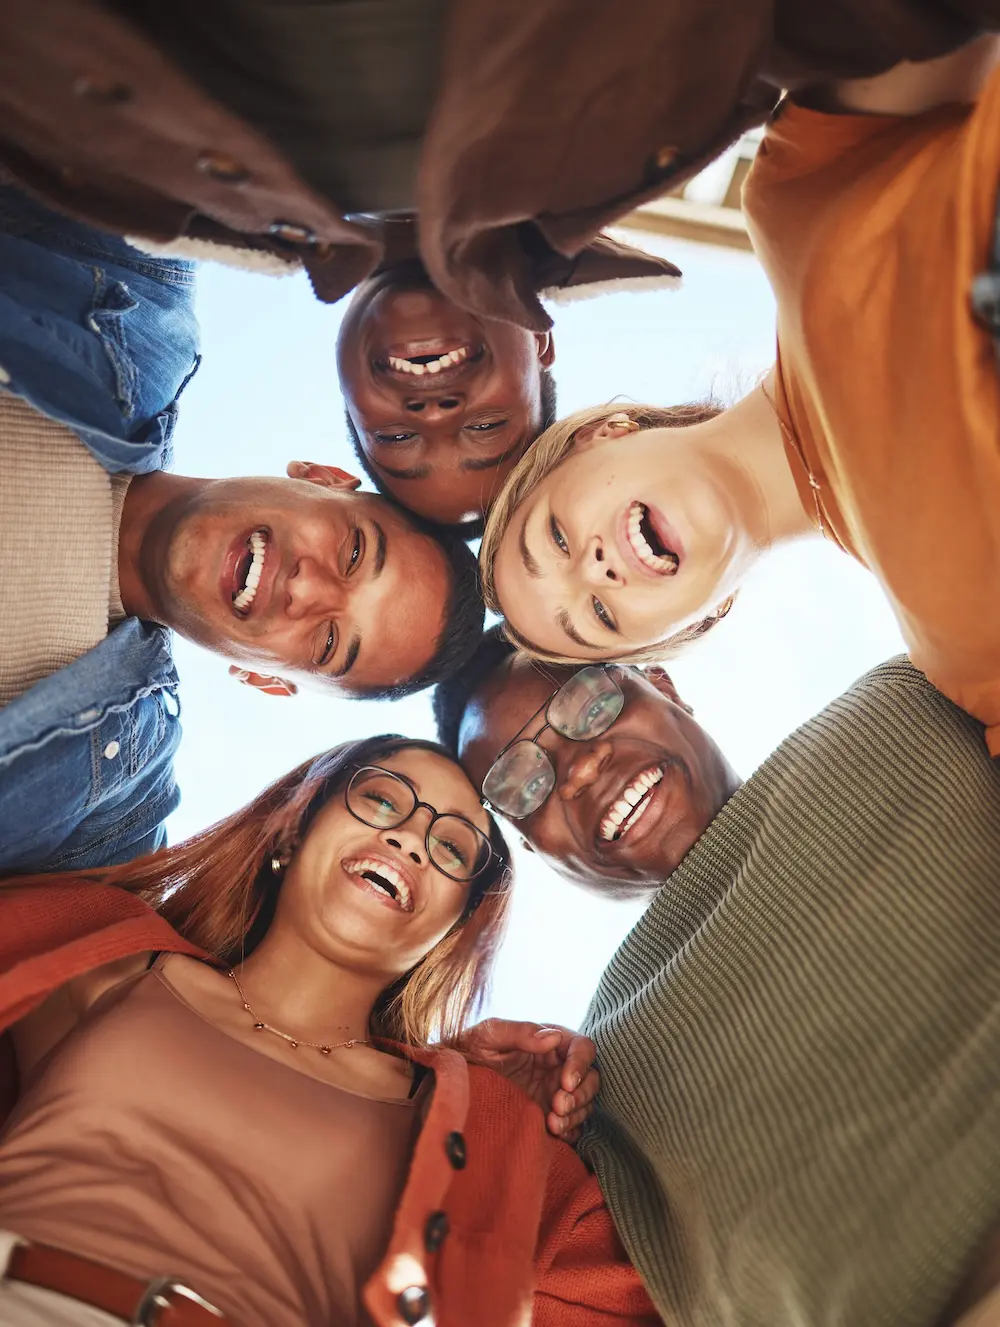 new dimensions day treatment centers suicidal ideation program: Group huddle smiling from below